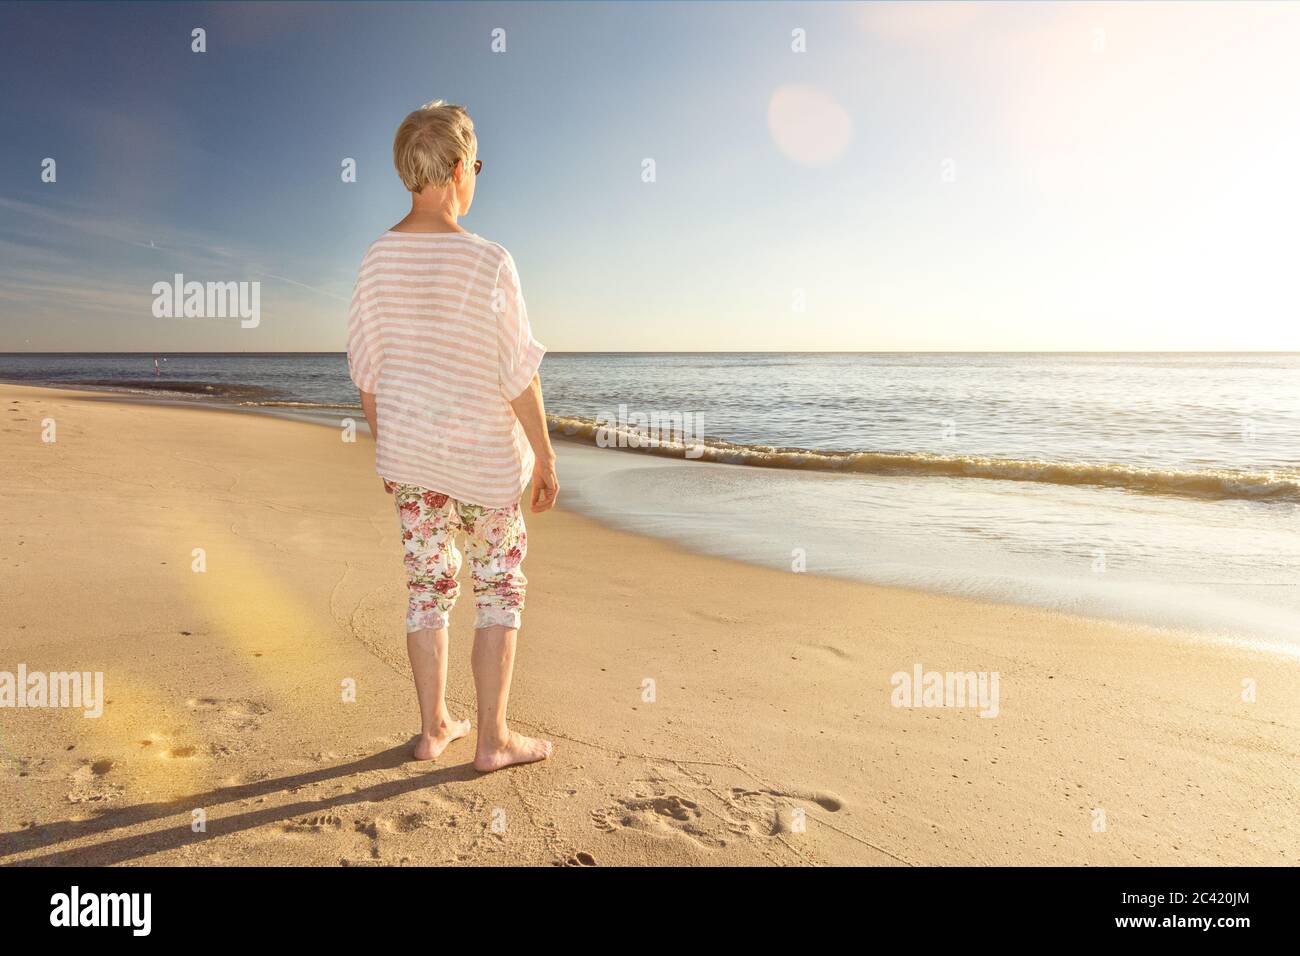 Older woman standing at the beach and looking towards the ocean with scenic lens flare Stock Photo